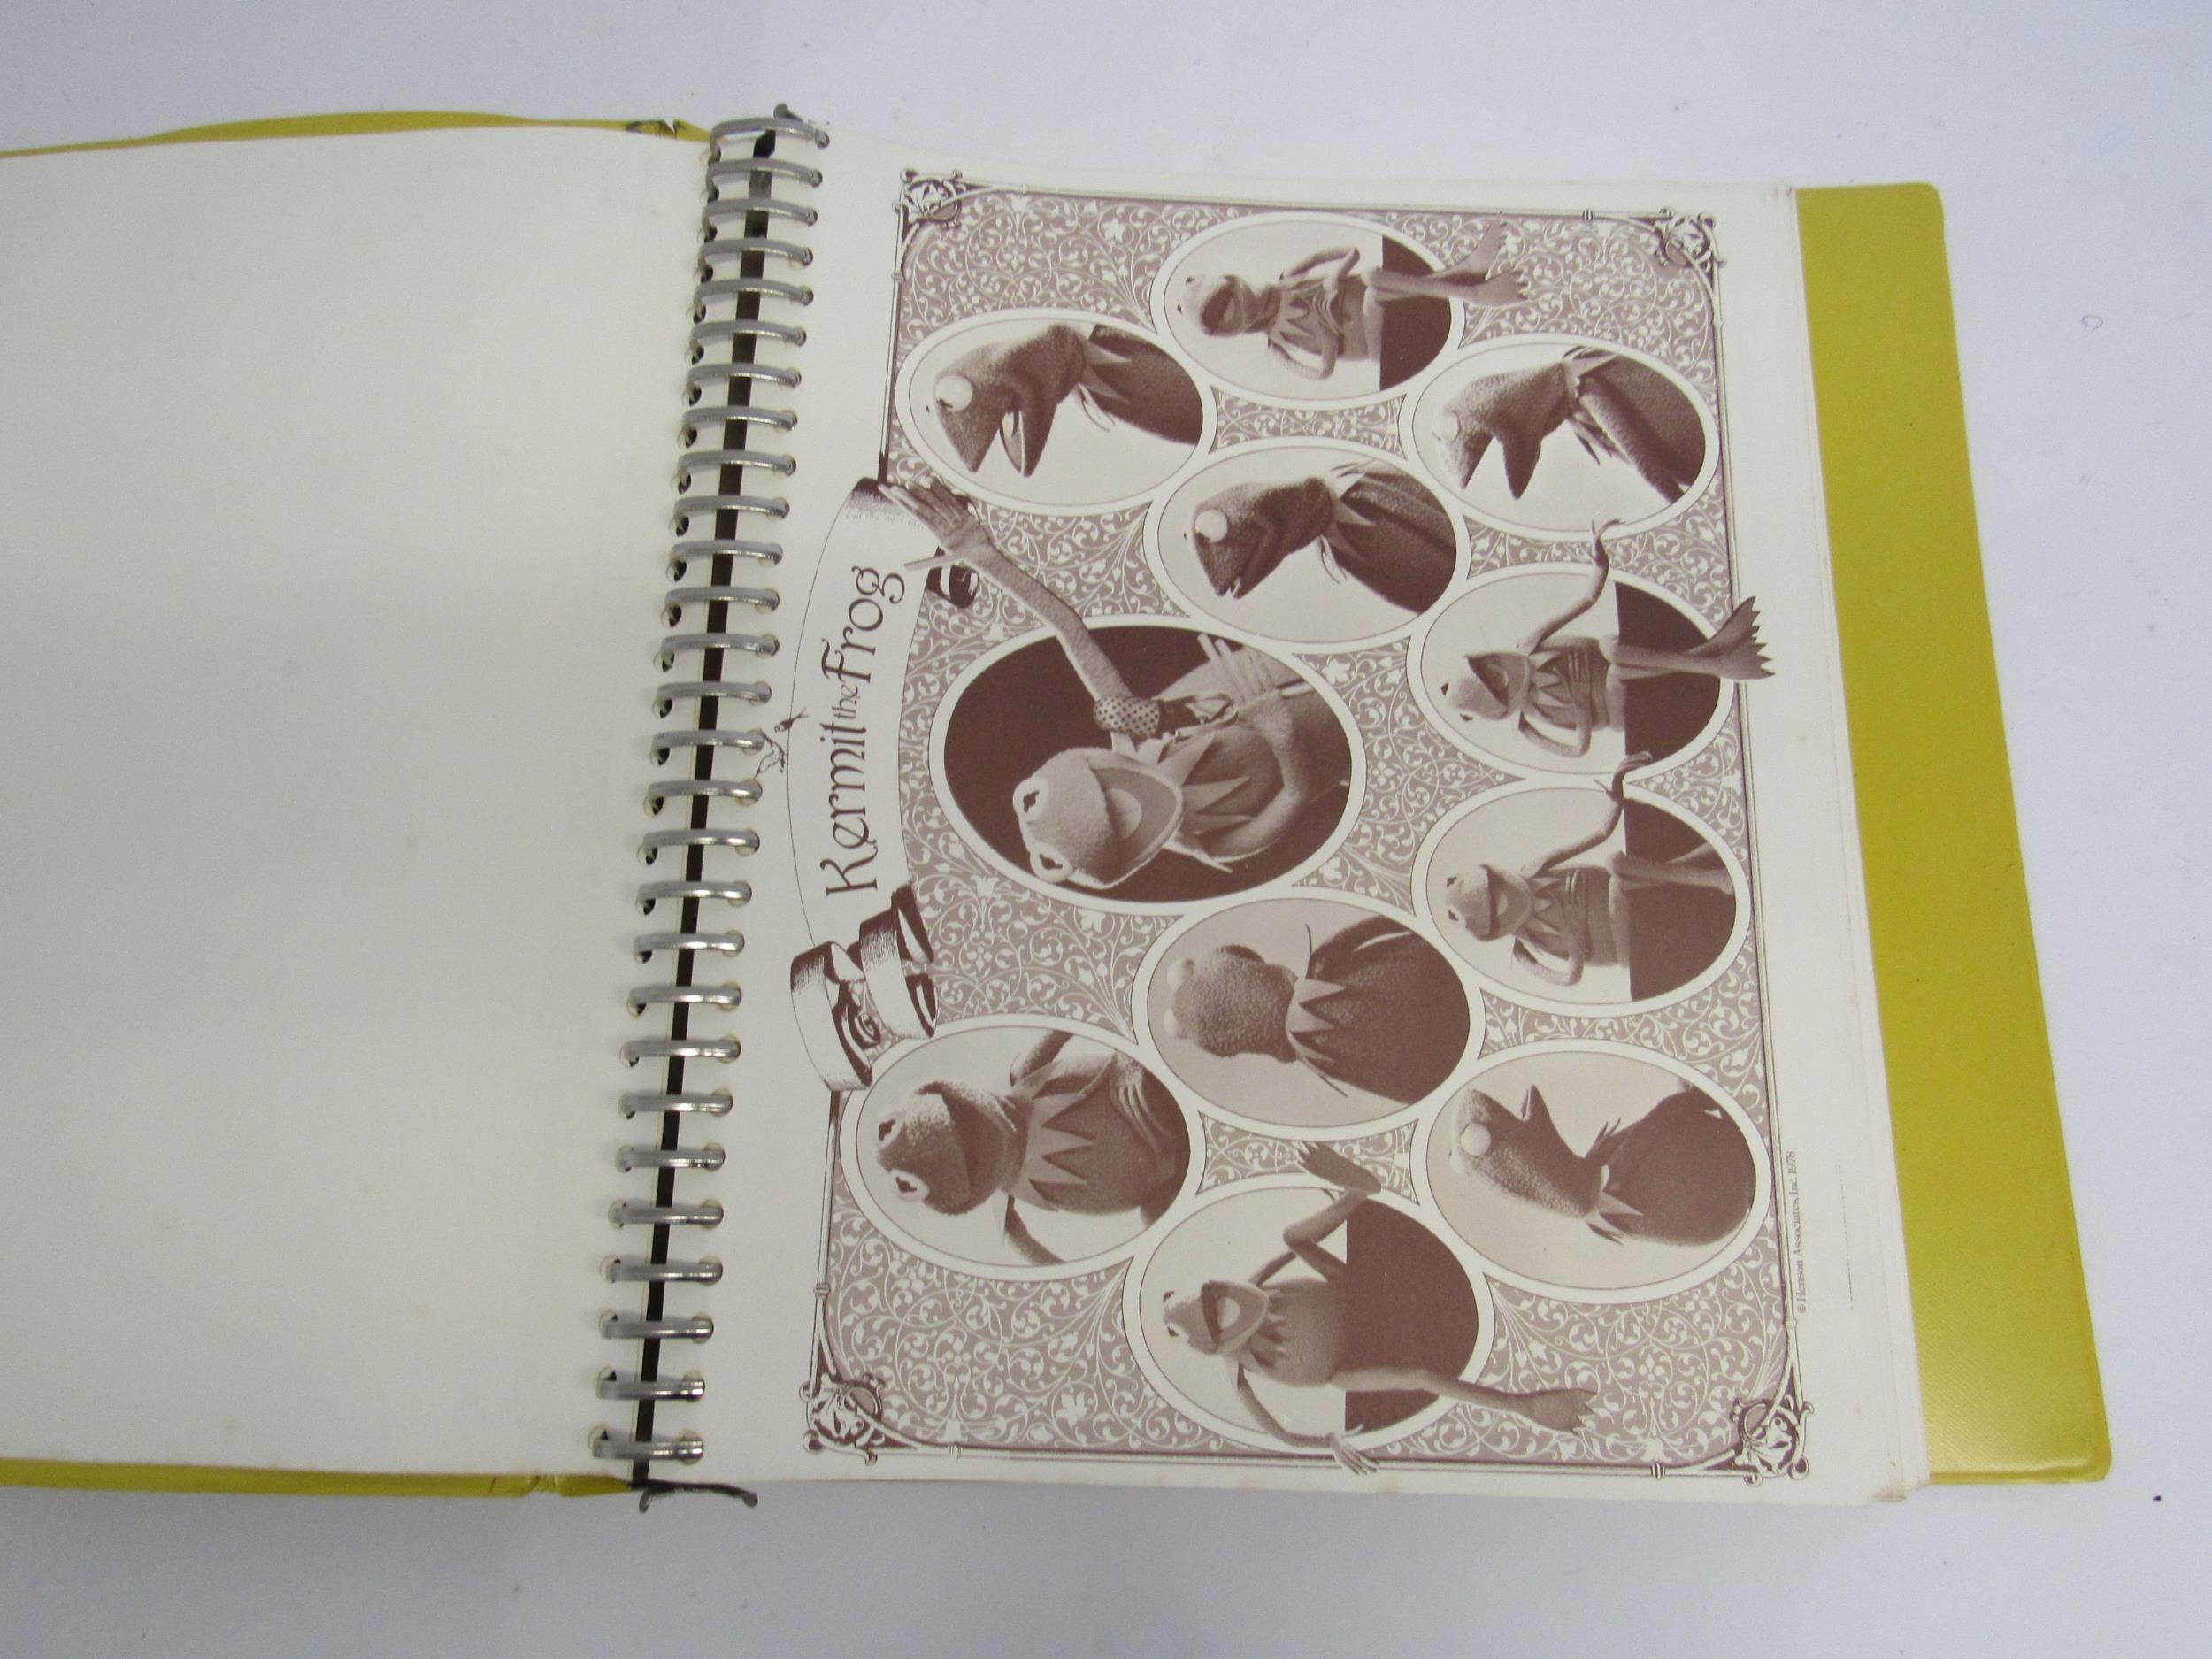 'The Muppet Show Style Book', book of style guides and character motifs for The Muppets, distributed - Image 4 of 9